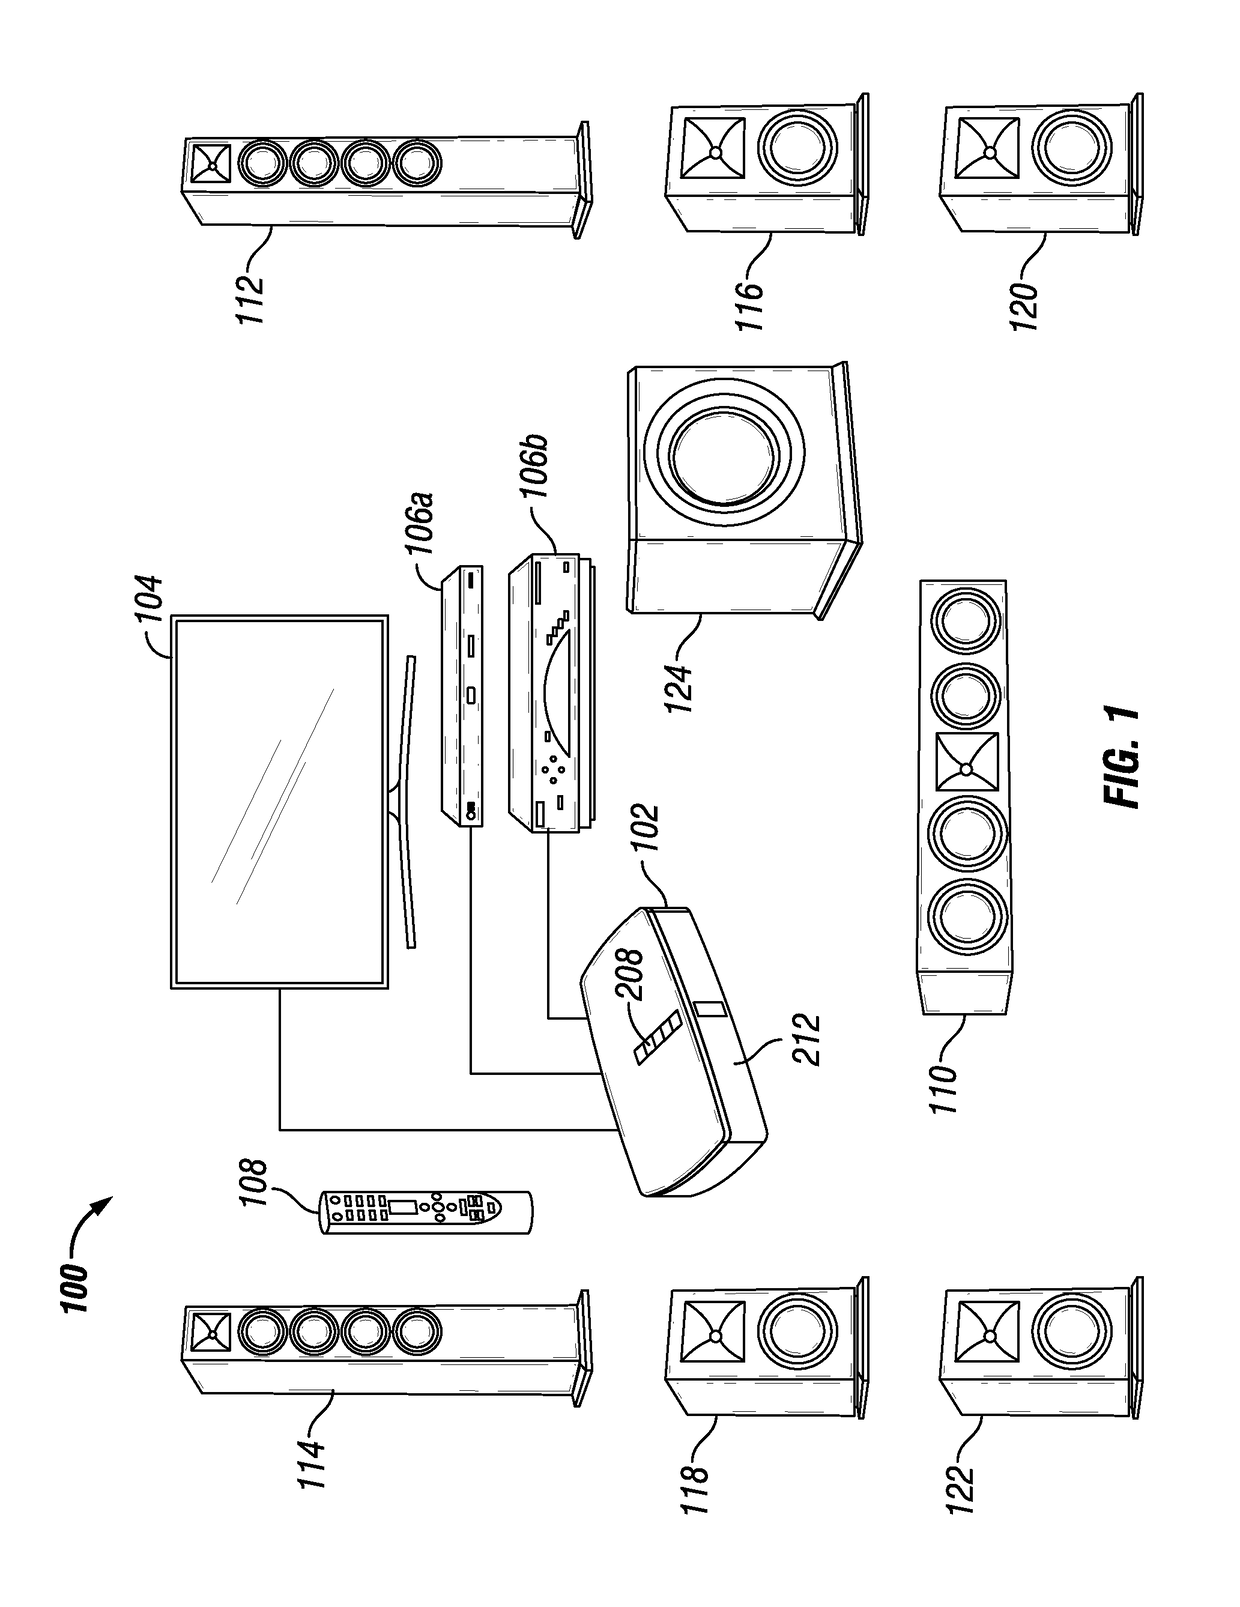 Bass management for home theater speaker system and hub